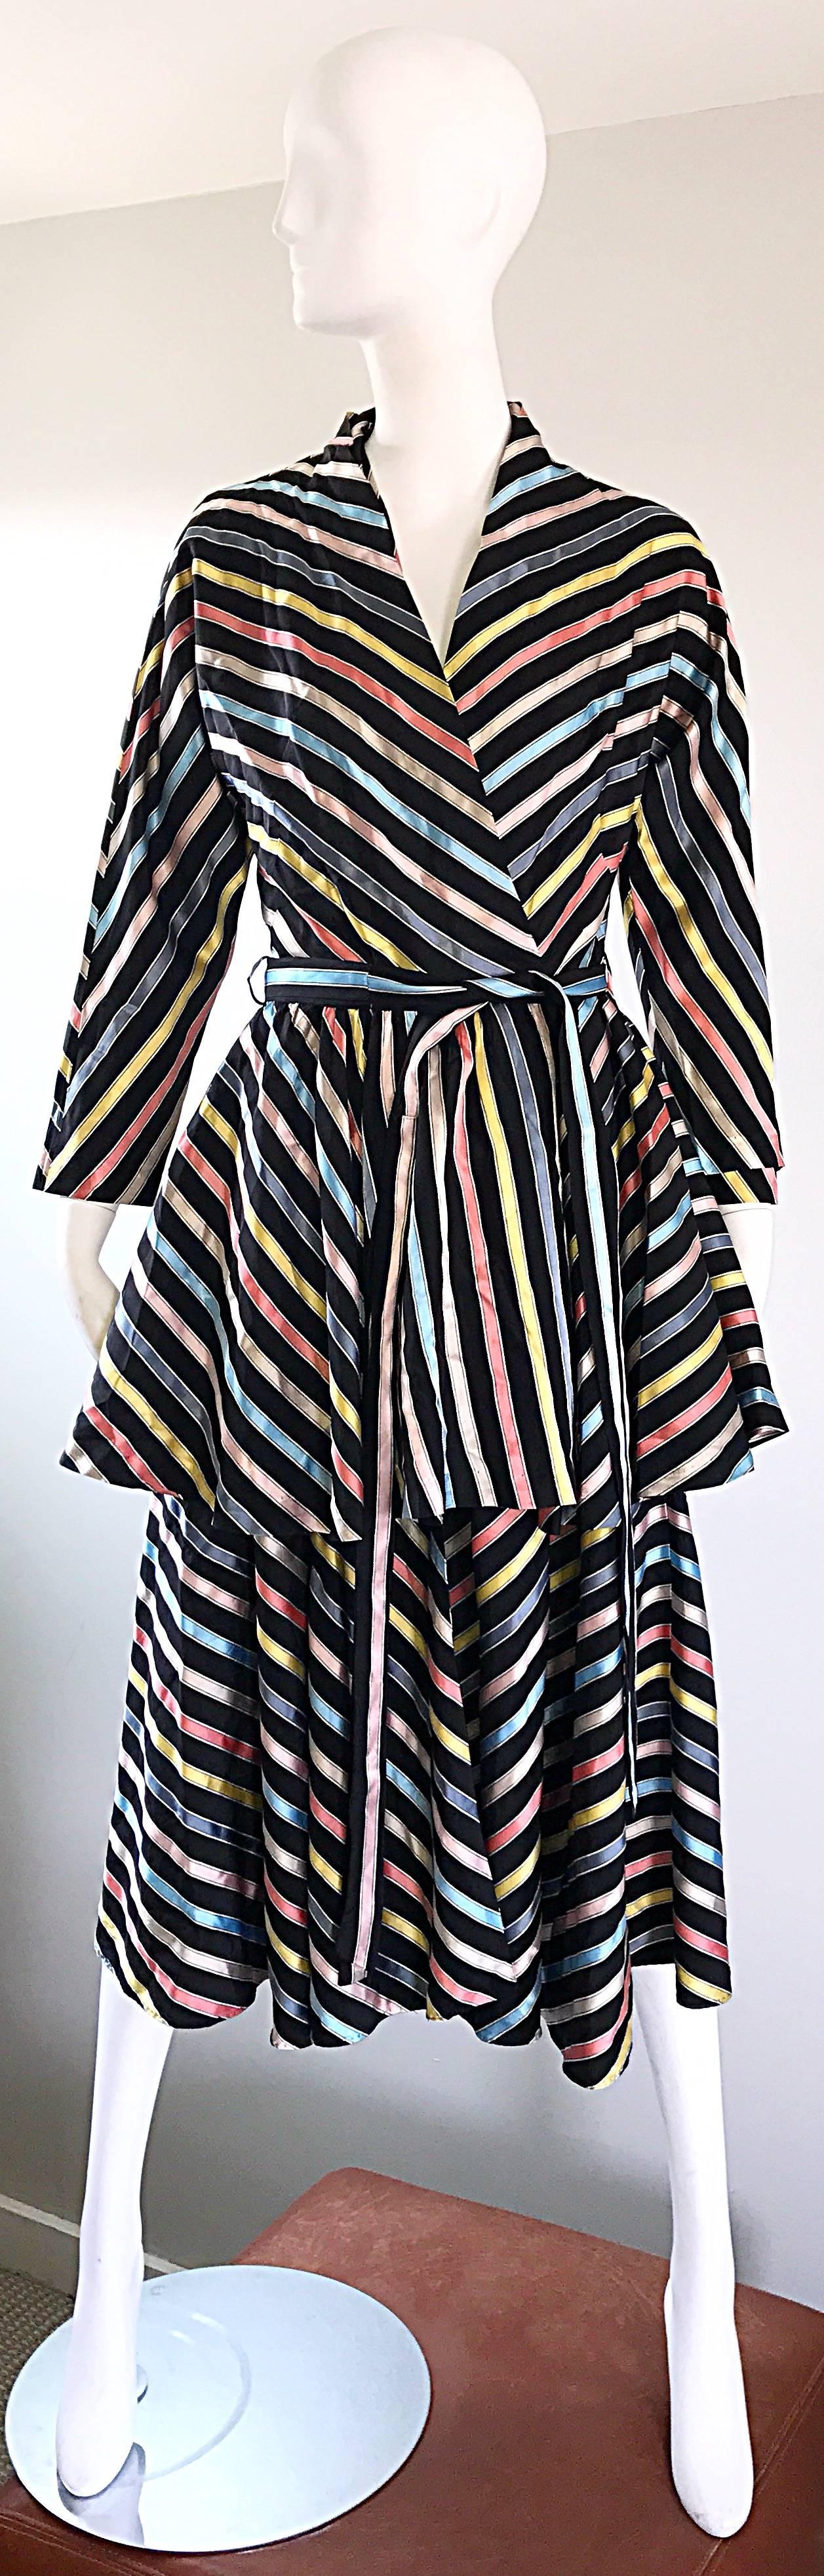 Amazing vintage 1940s MAXAN cold silk black rainbow three piece wrap dress, robe and sash belt! Colorful pastel rainbows in chevron stripes of pink, blue, yellow, salmon and ivory. The possibilities are endless with this ensemble. The wrap dress is